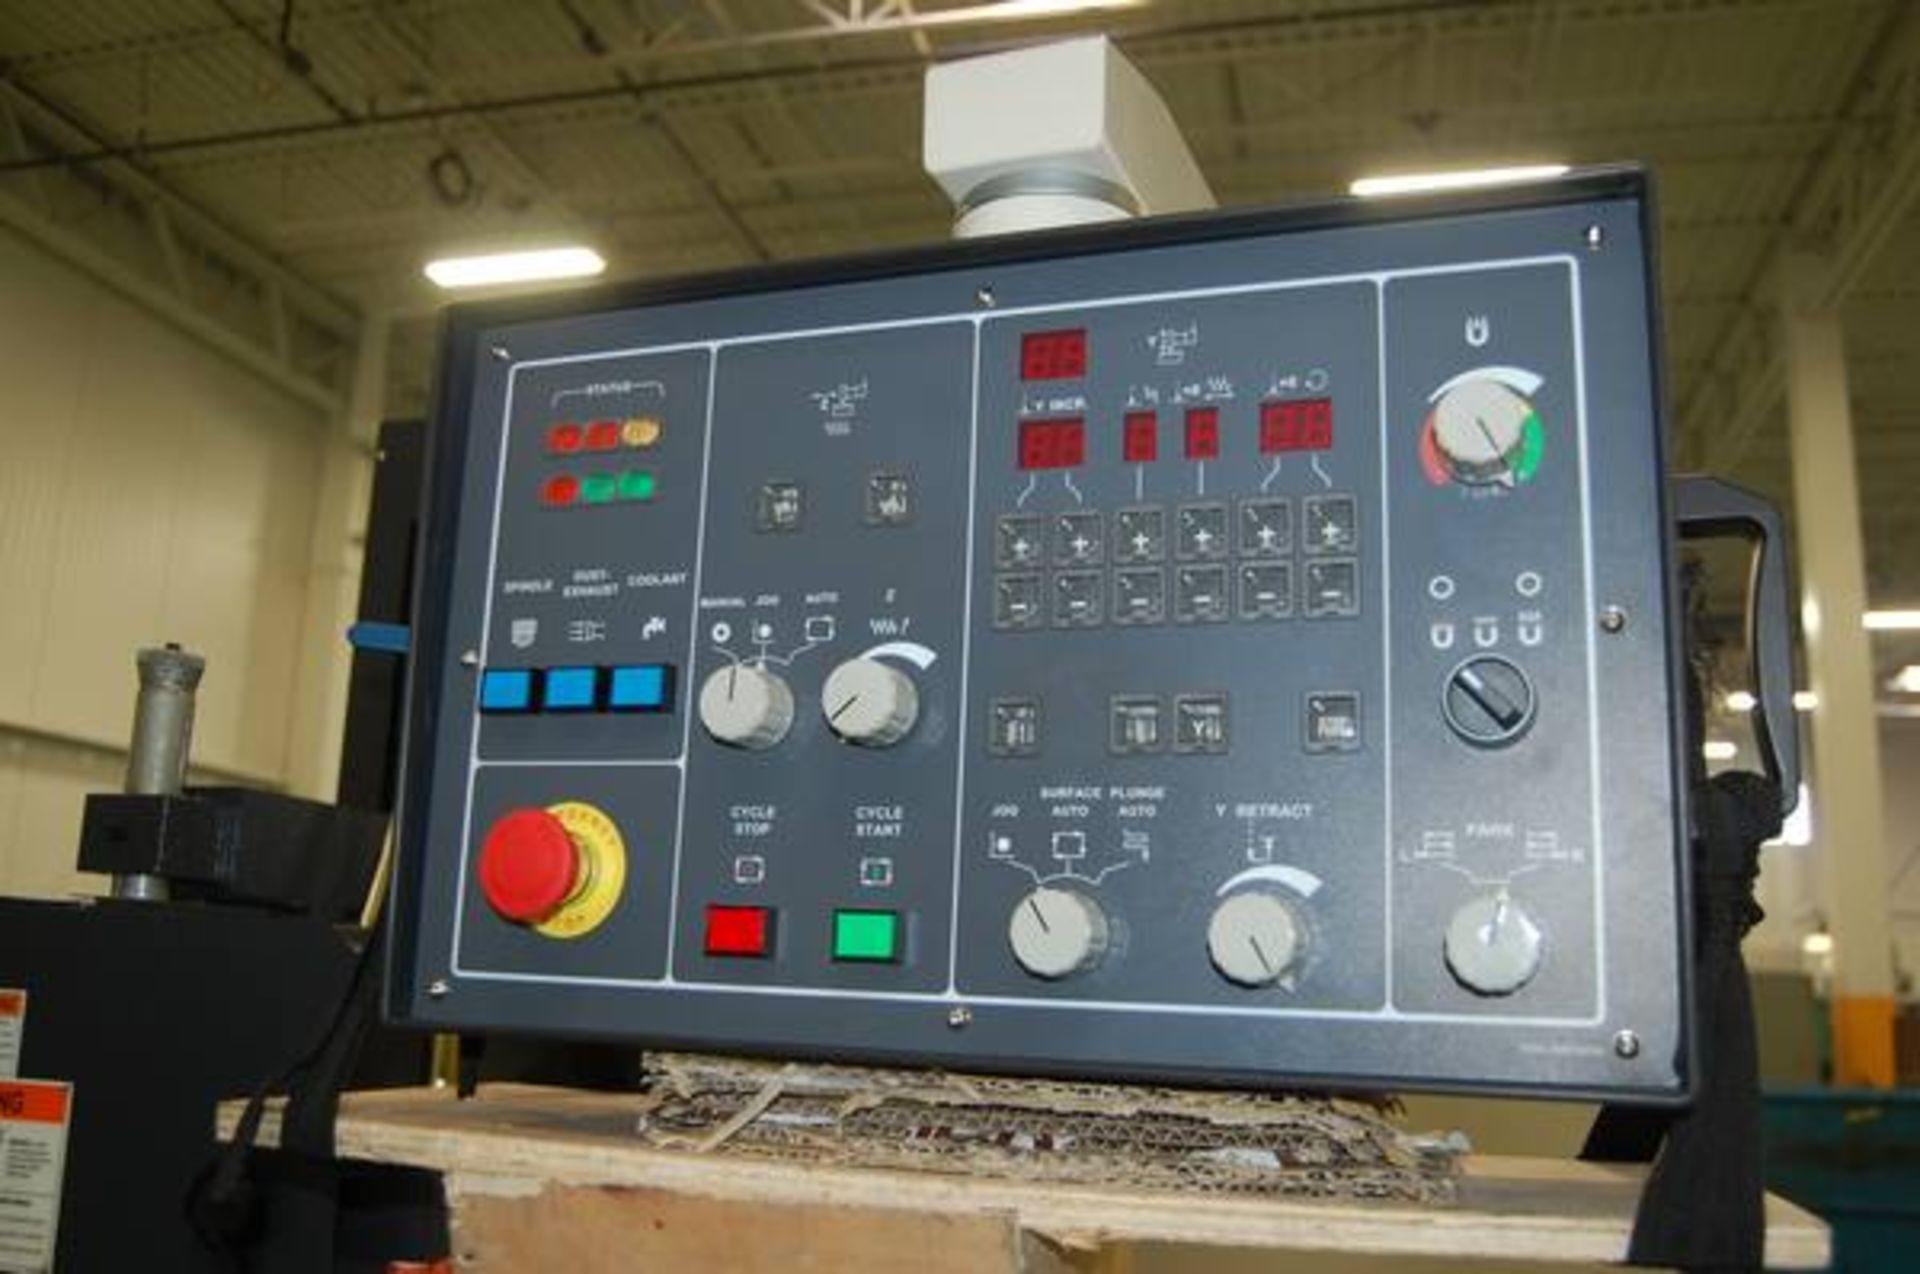 Chevalier Model FSG-3A1224 12" x 24" Hydraulic Automatic Surface Grinder; Serial Number: - Image 3 of 4